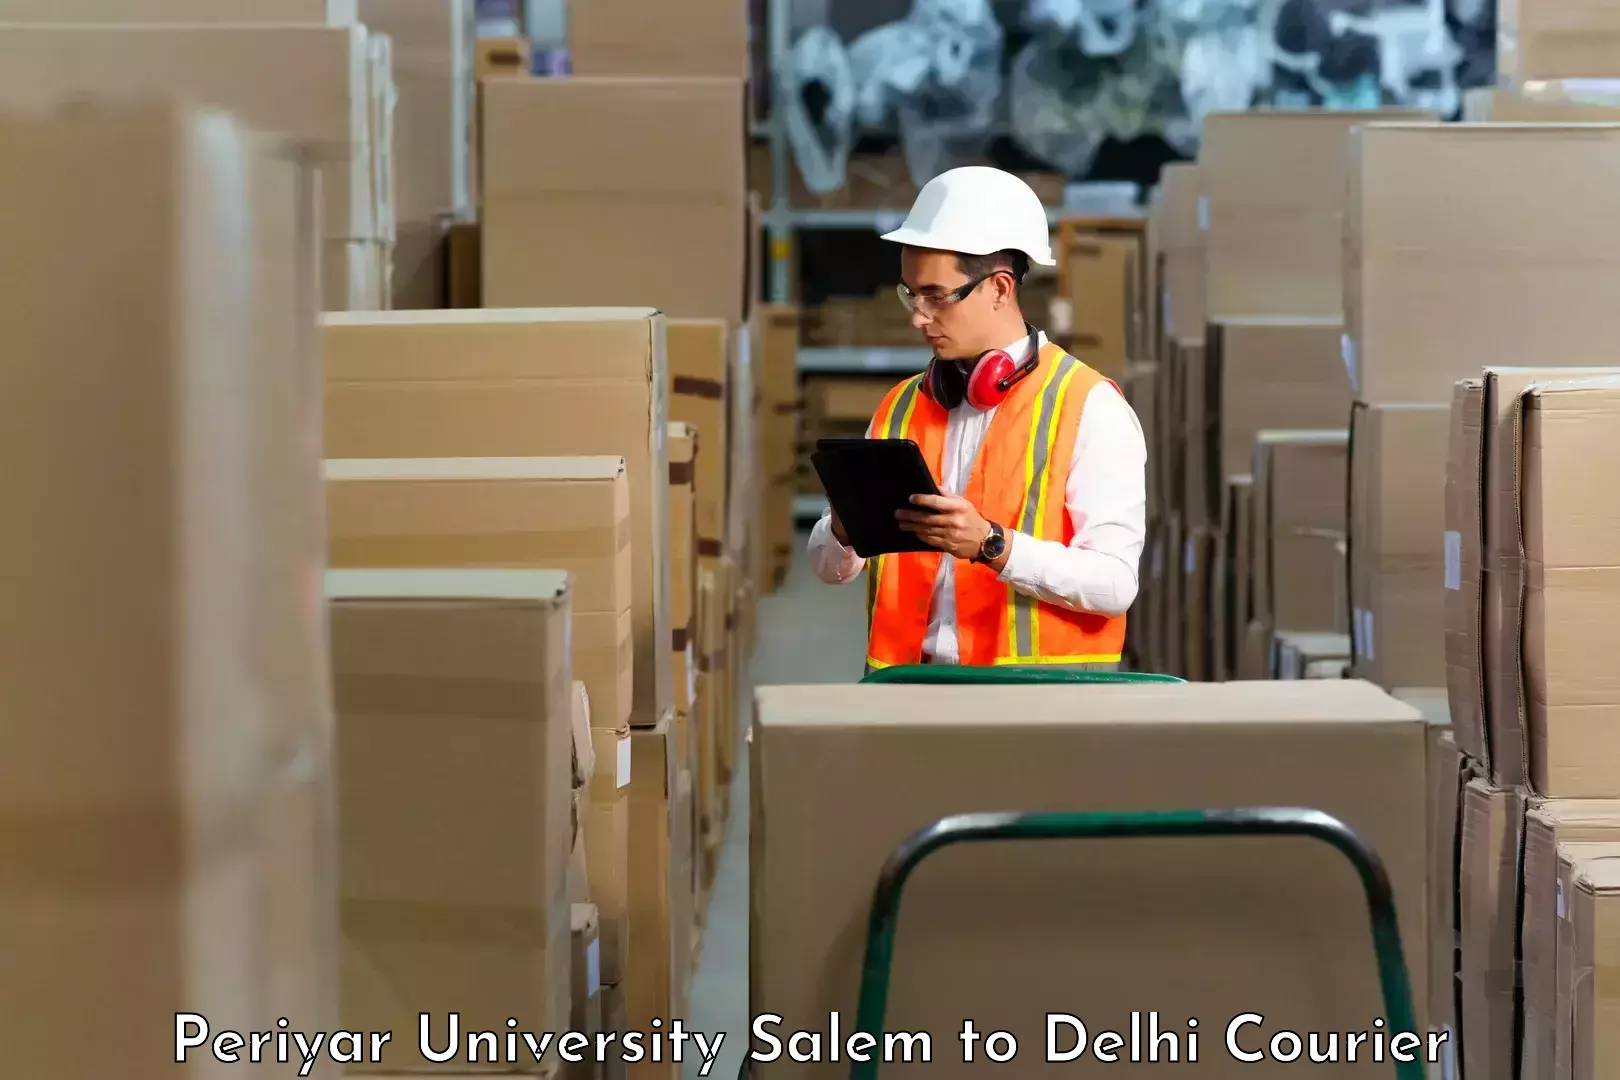 Customer-oriented courier services Periyar University Salem to NCR